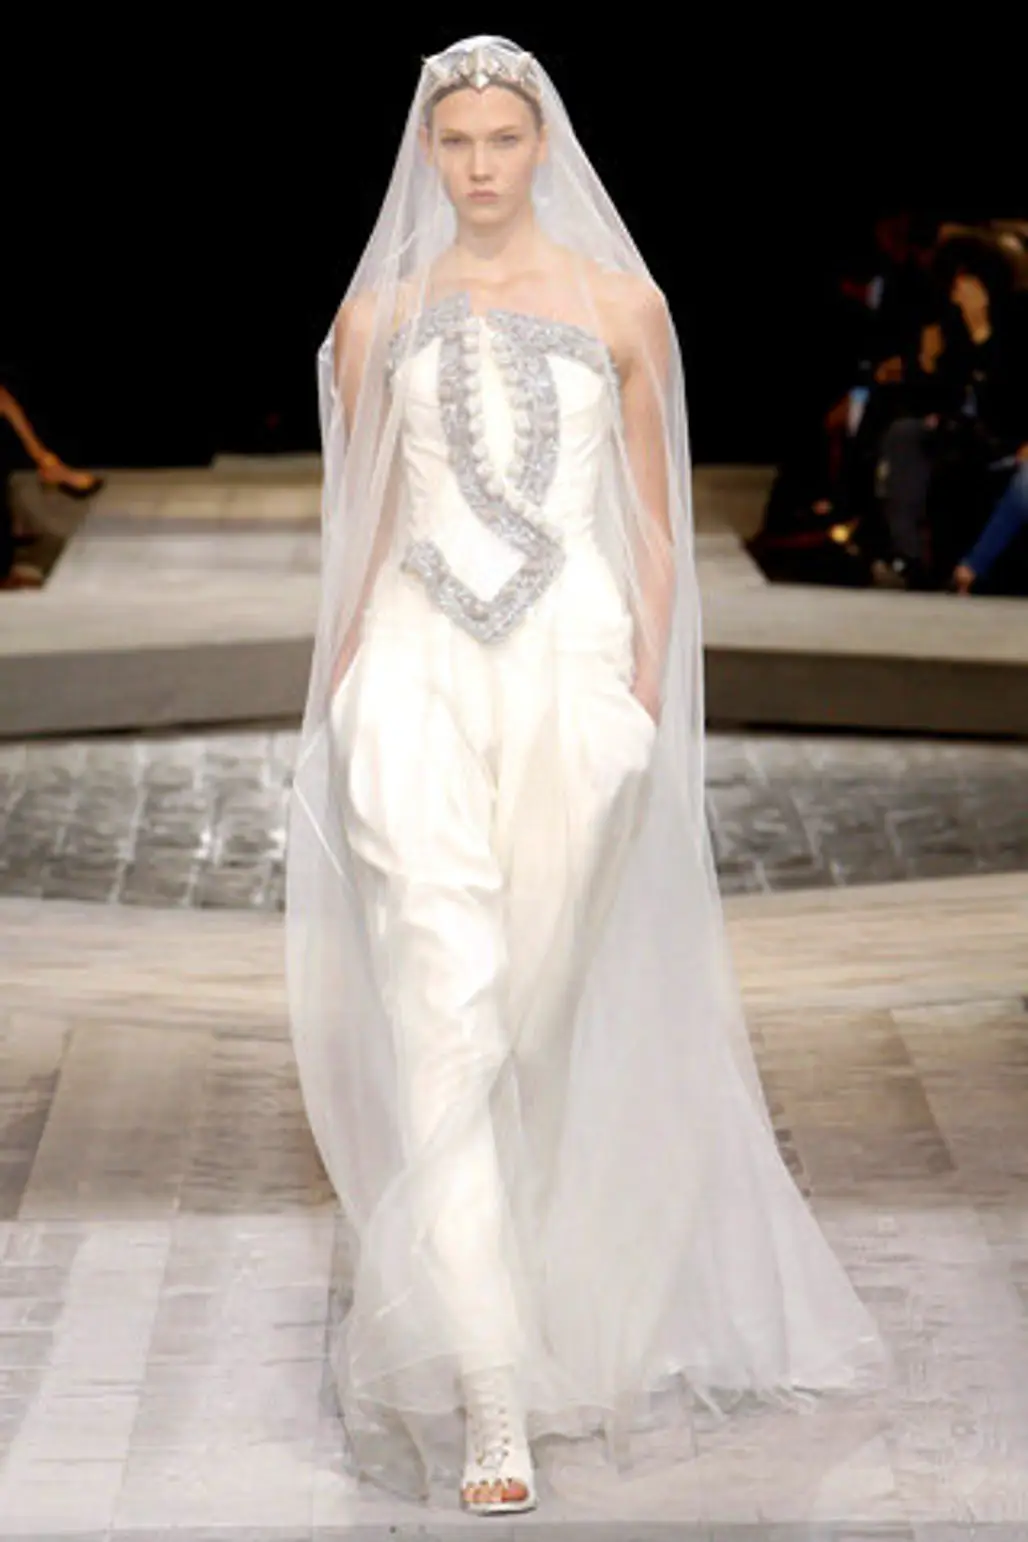 Edgy Givenchy’s Wedding Dress